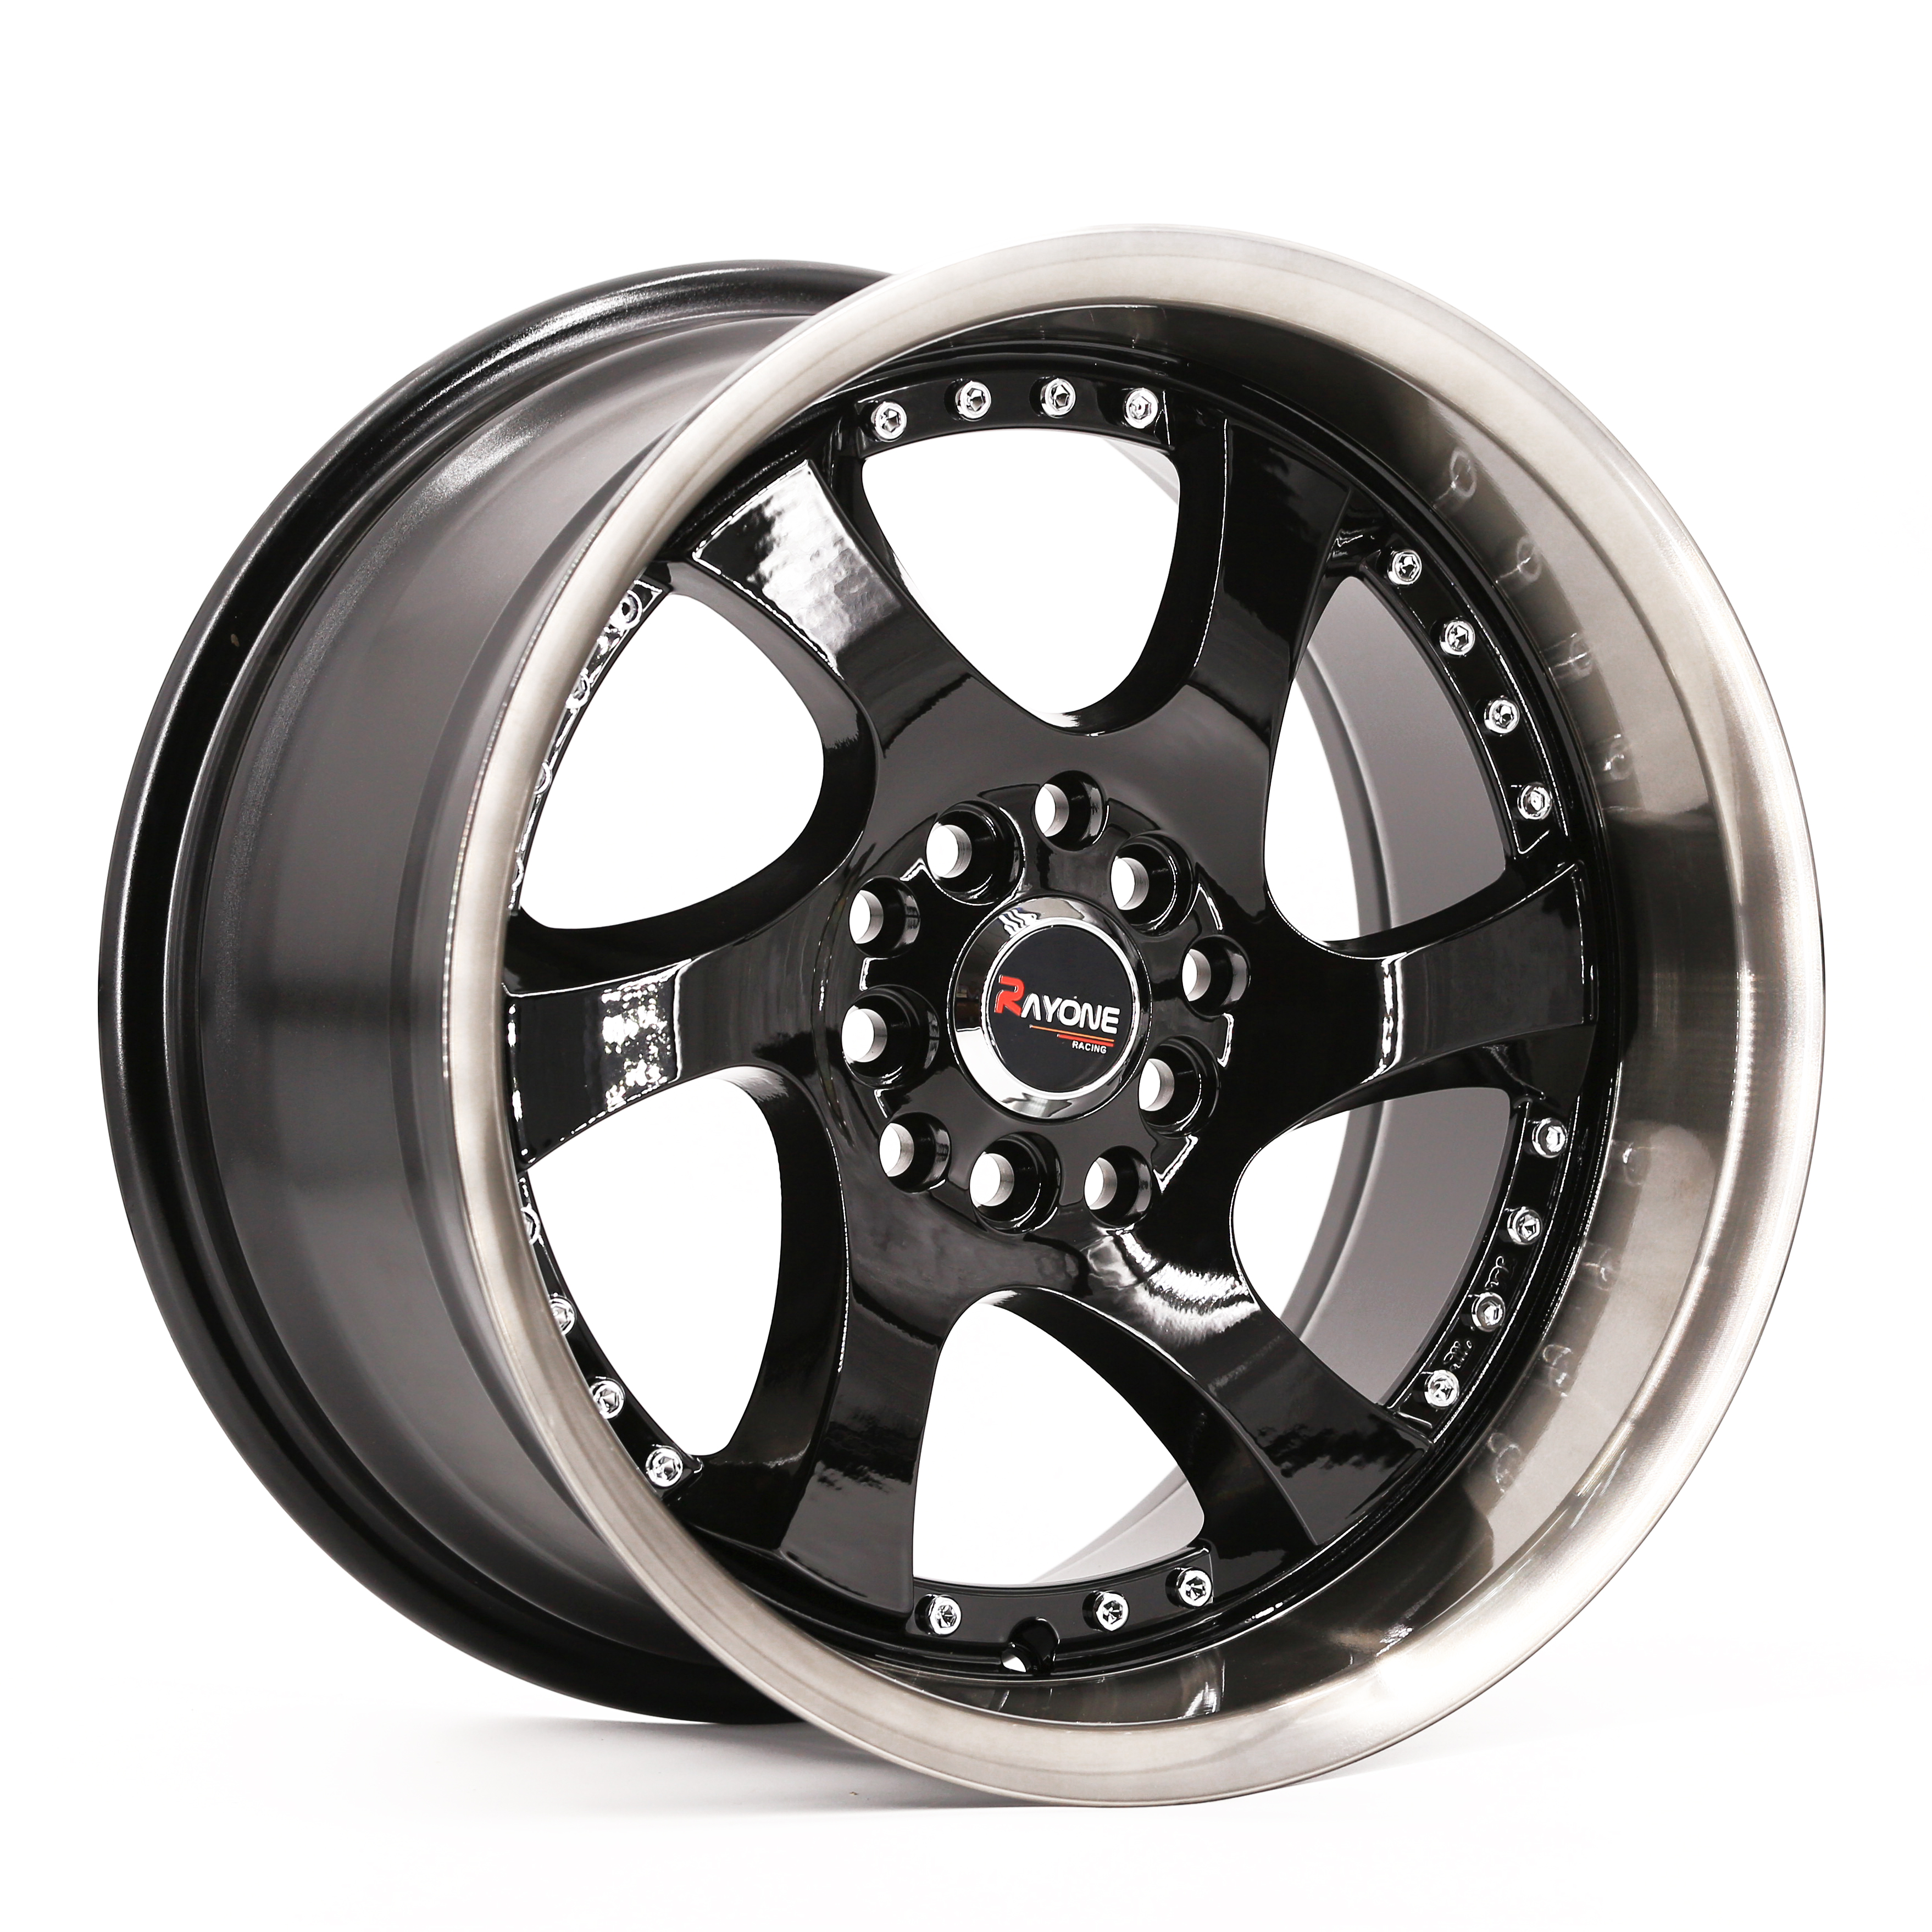 China Factory for 19 Alloy Wheels - New design Passenger 16X8.5J ET25 Car alloy wheels with Custom holes – Rayone